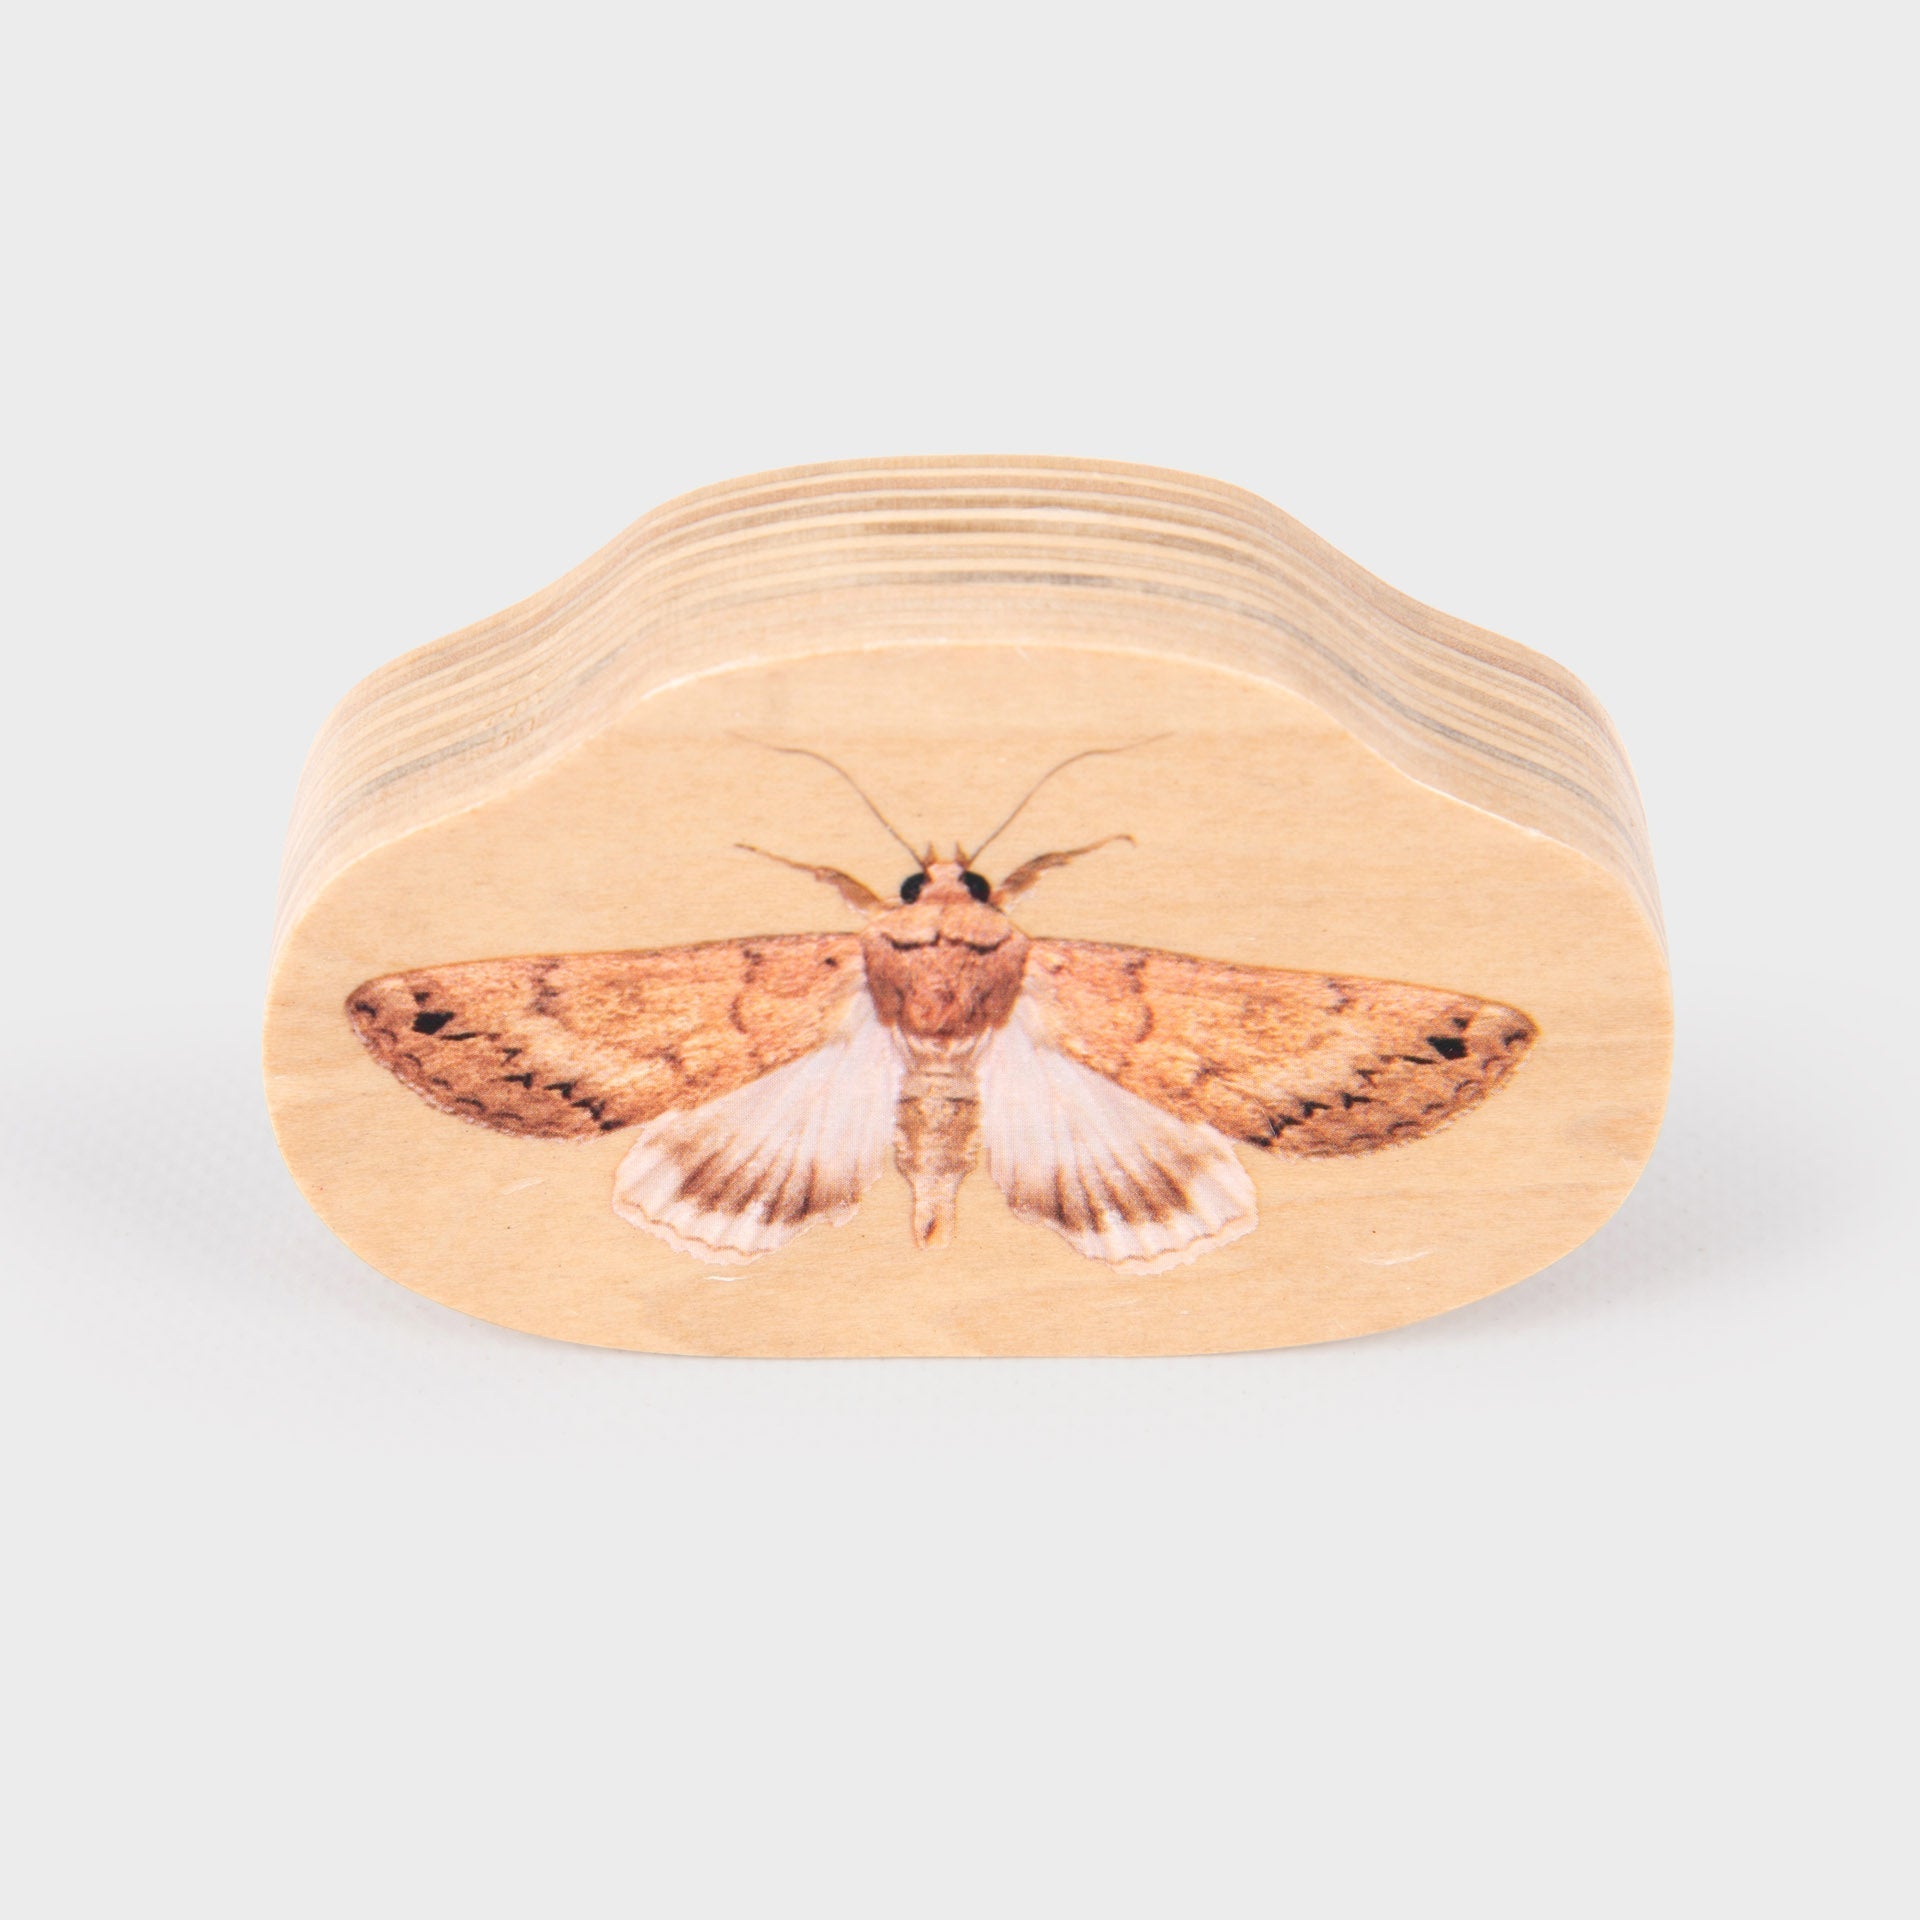 TickiT Wooden Minibeast Blocks, Our TickiT® Wooden Minibeast Blocks are a great way for your child to examine creepy crawlies up close as the chunky wooden picture blocks are colour printed on both sides with real photographic images of minibeasts from around the world.The realistic imagery will enable your child to learn about bugs and inspire them to identify insects when out on nature walks or see them in books. Older children can be encouraged to visualise characters in story-telling and creative writin